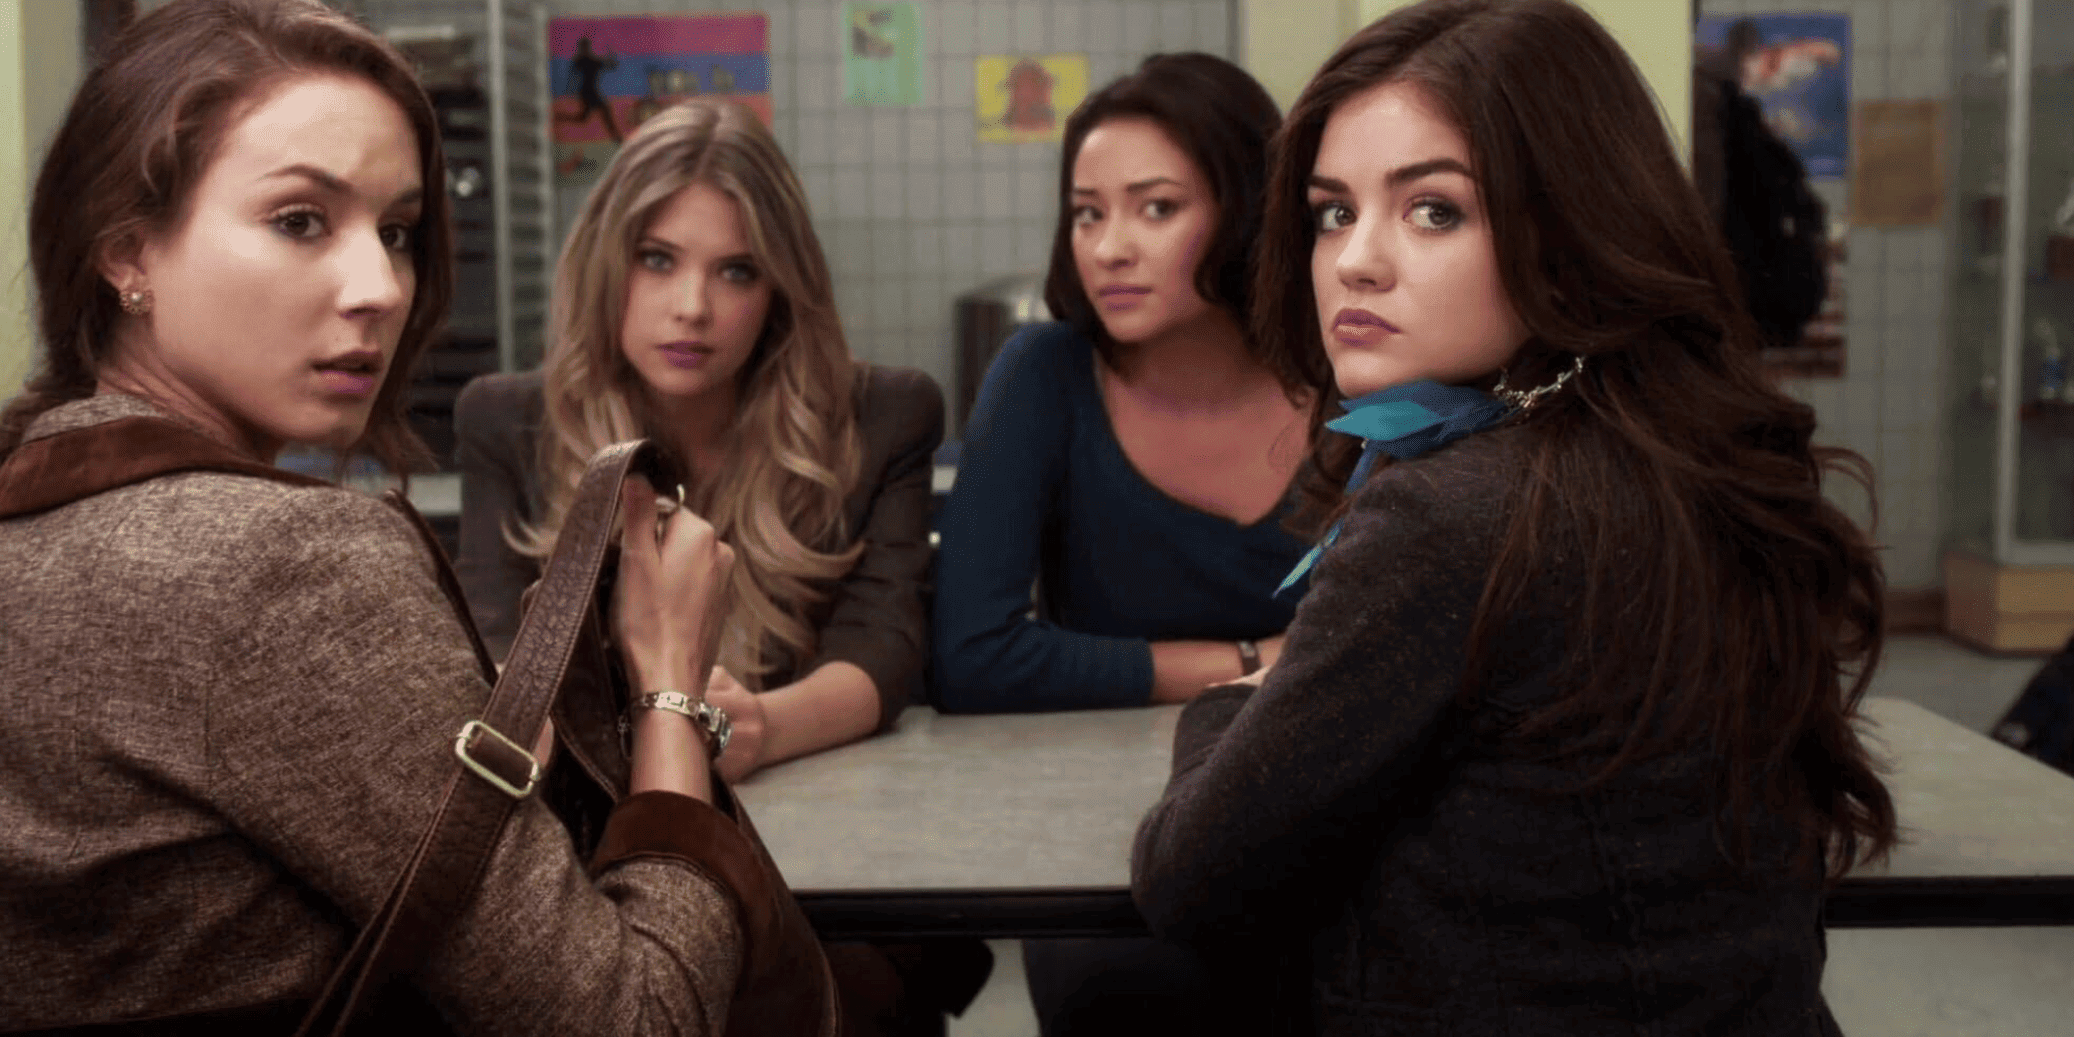 Four teenage girls sit in a school cafeteria in this image from Warner Horizon Television